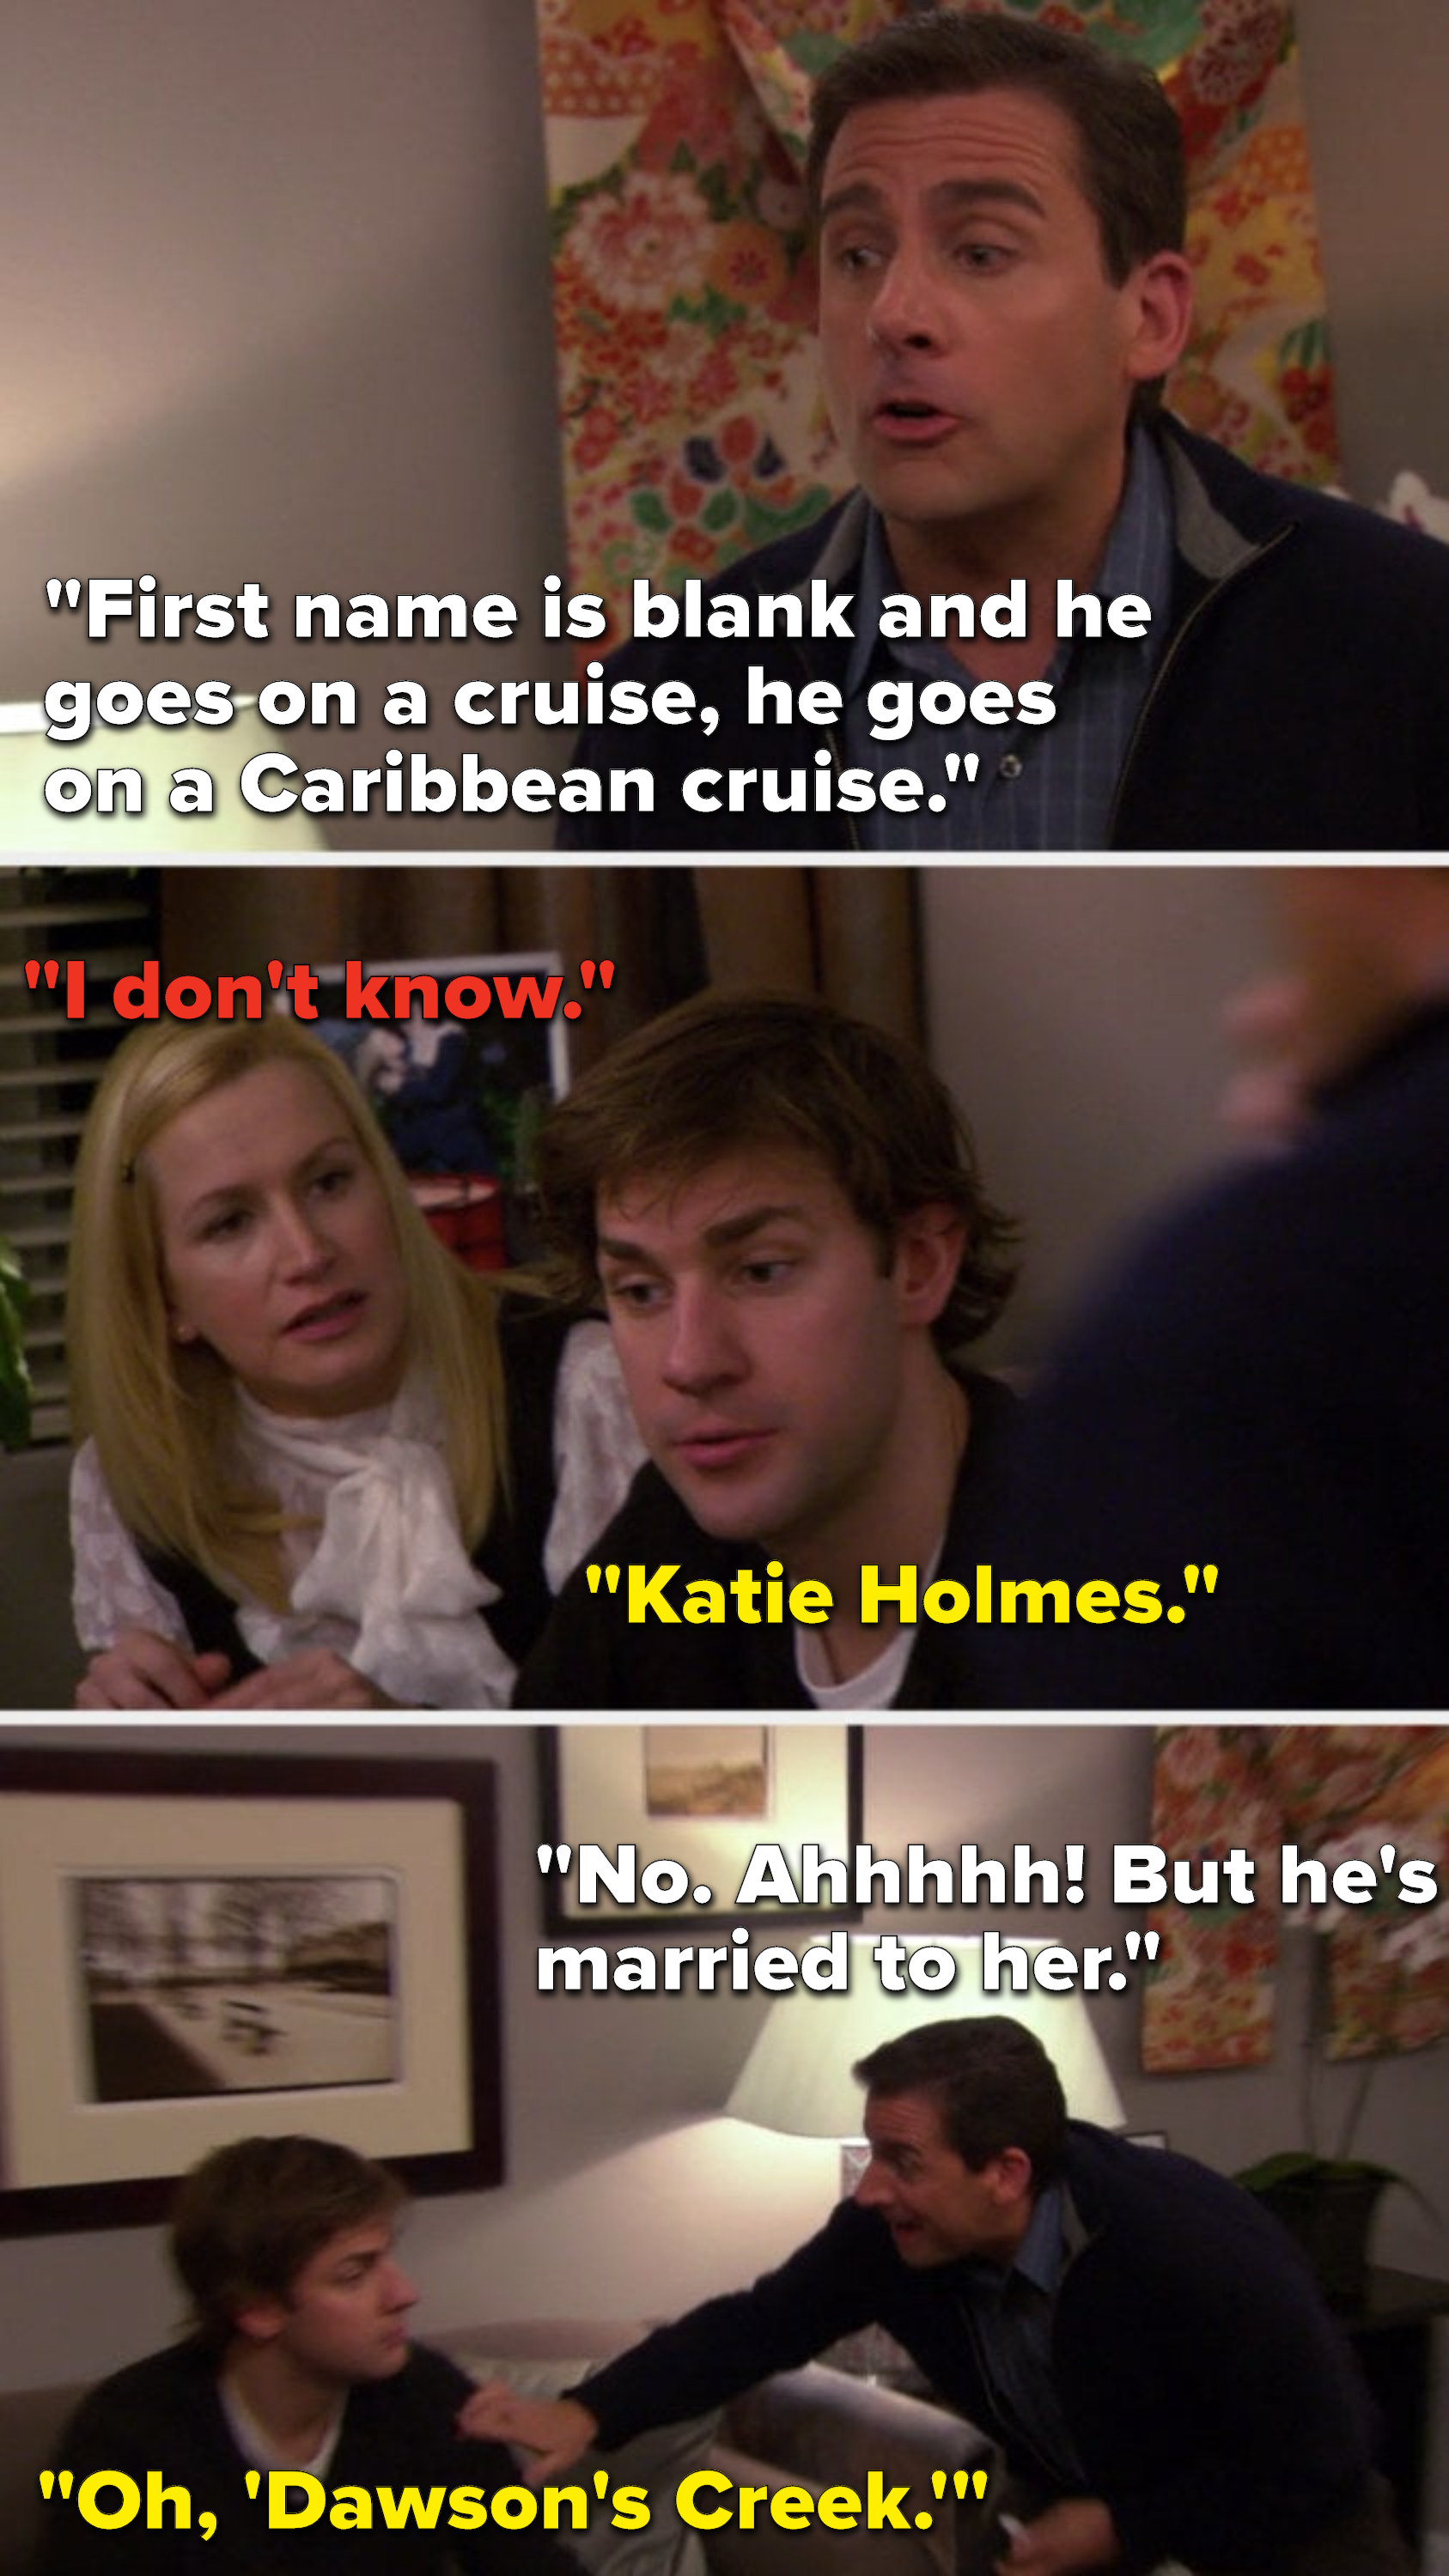 Michael says, &quot;First name is blank and he goes on a cruise, he goes on a Caribbean cruise,&quot; Angela says, &quot;I don&#x27;t know,&quot; Jim says, &quot;Katie Holmes,&quot; Michael says, &quot;No, ahhhhh, but he&#x27;s married to her,&quot; and Jim says, &quot;Oh, &#x27;Dawson&#x27;s Creek&#x27;&quot;